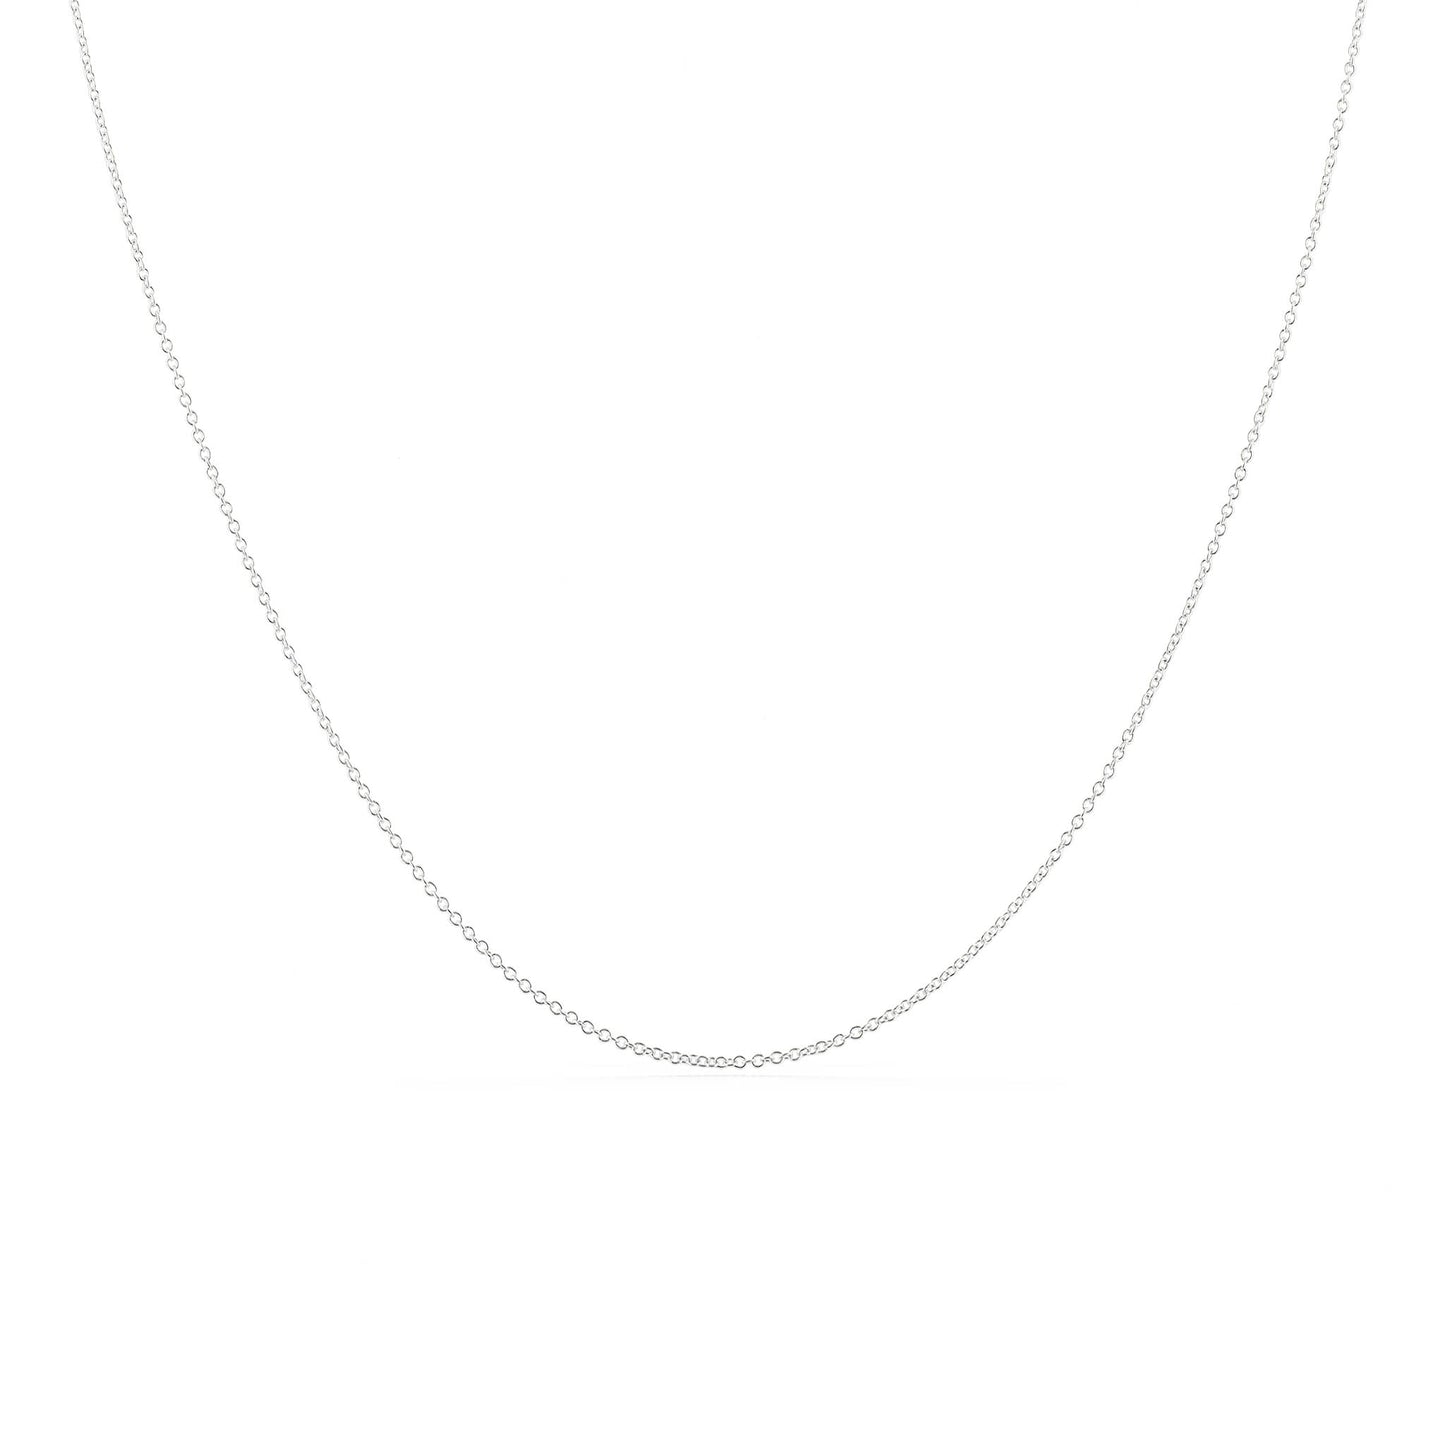 771787 - 14K White Gold - 16" Adjustable Keiki Cable Chain, 0.8mm